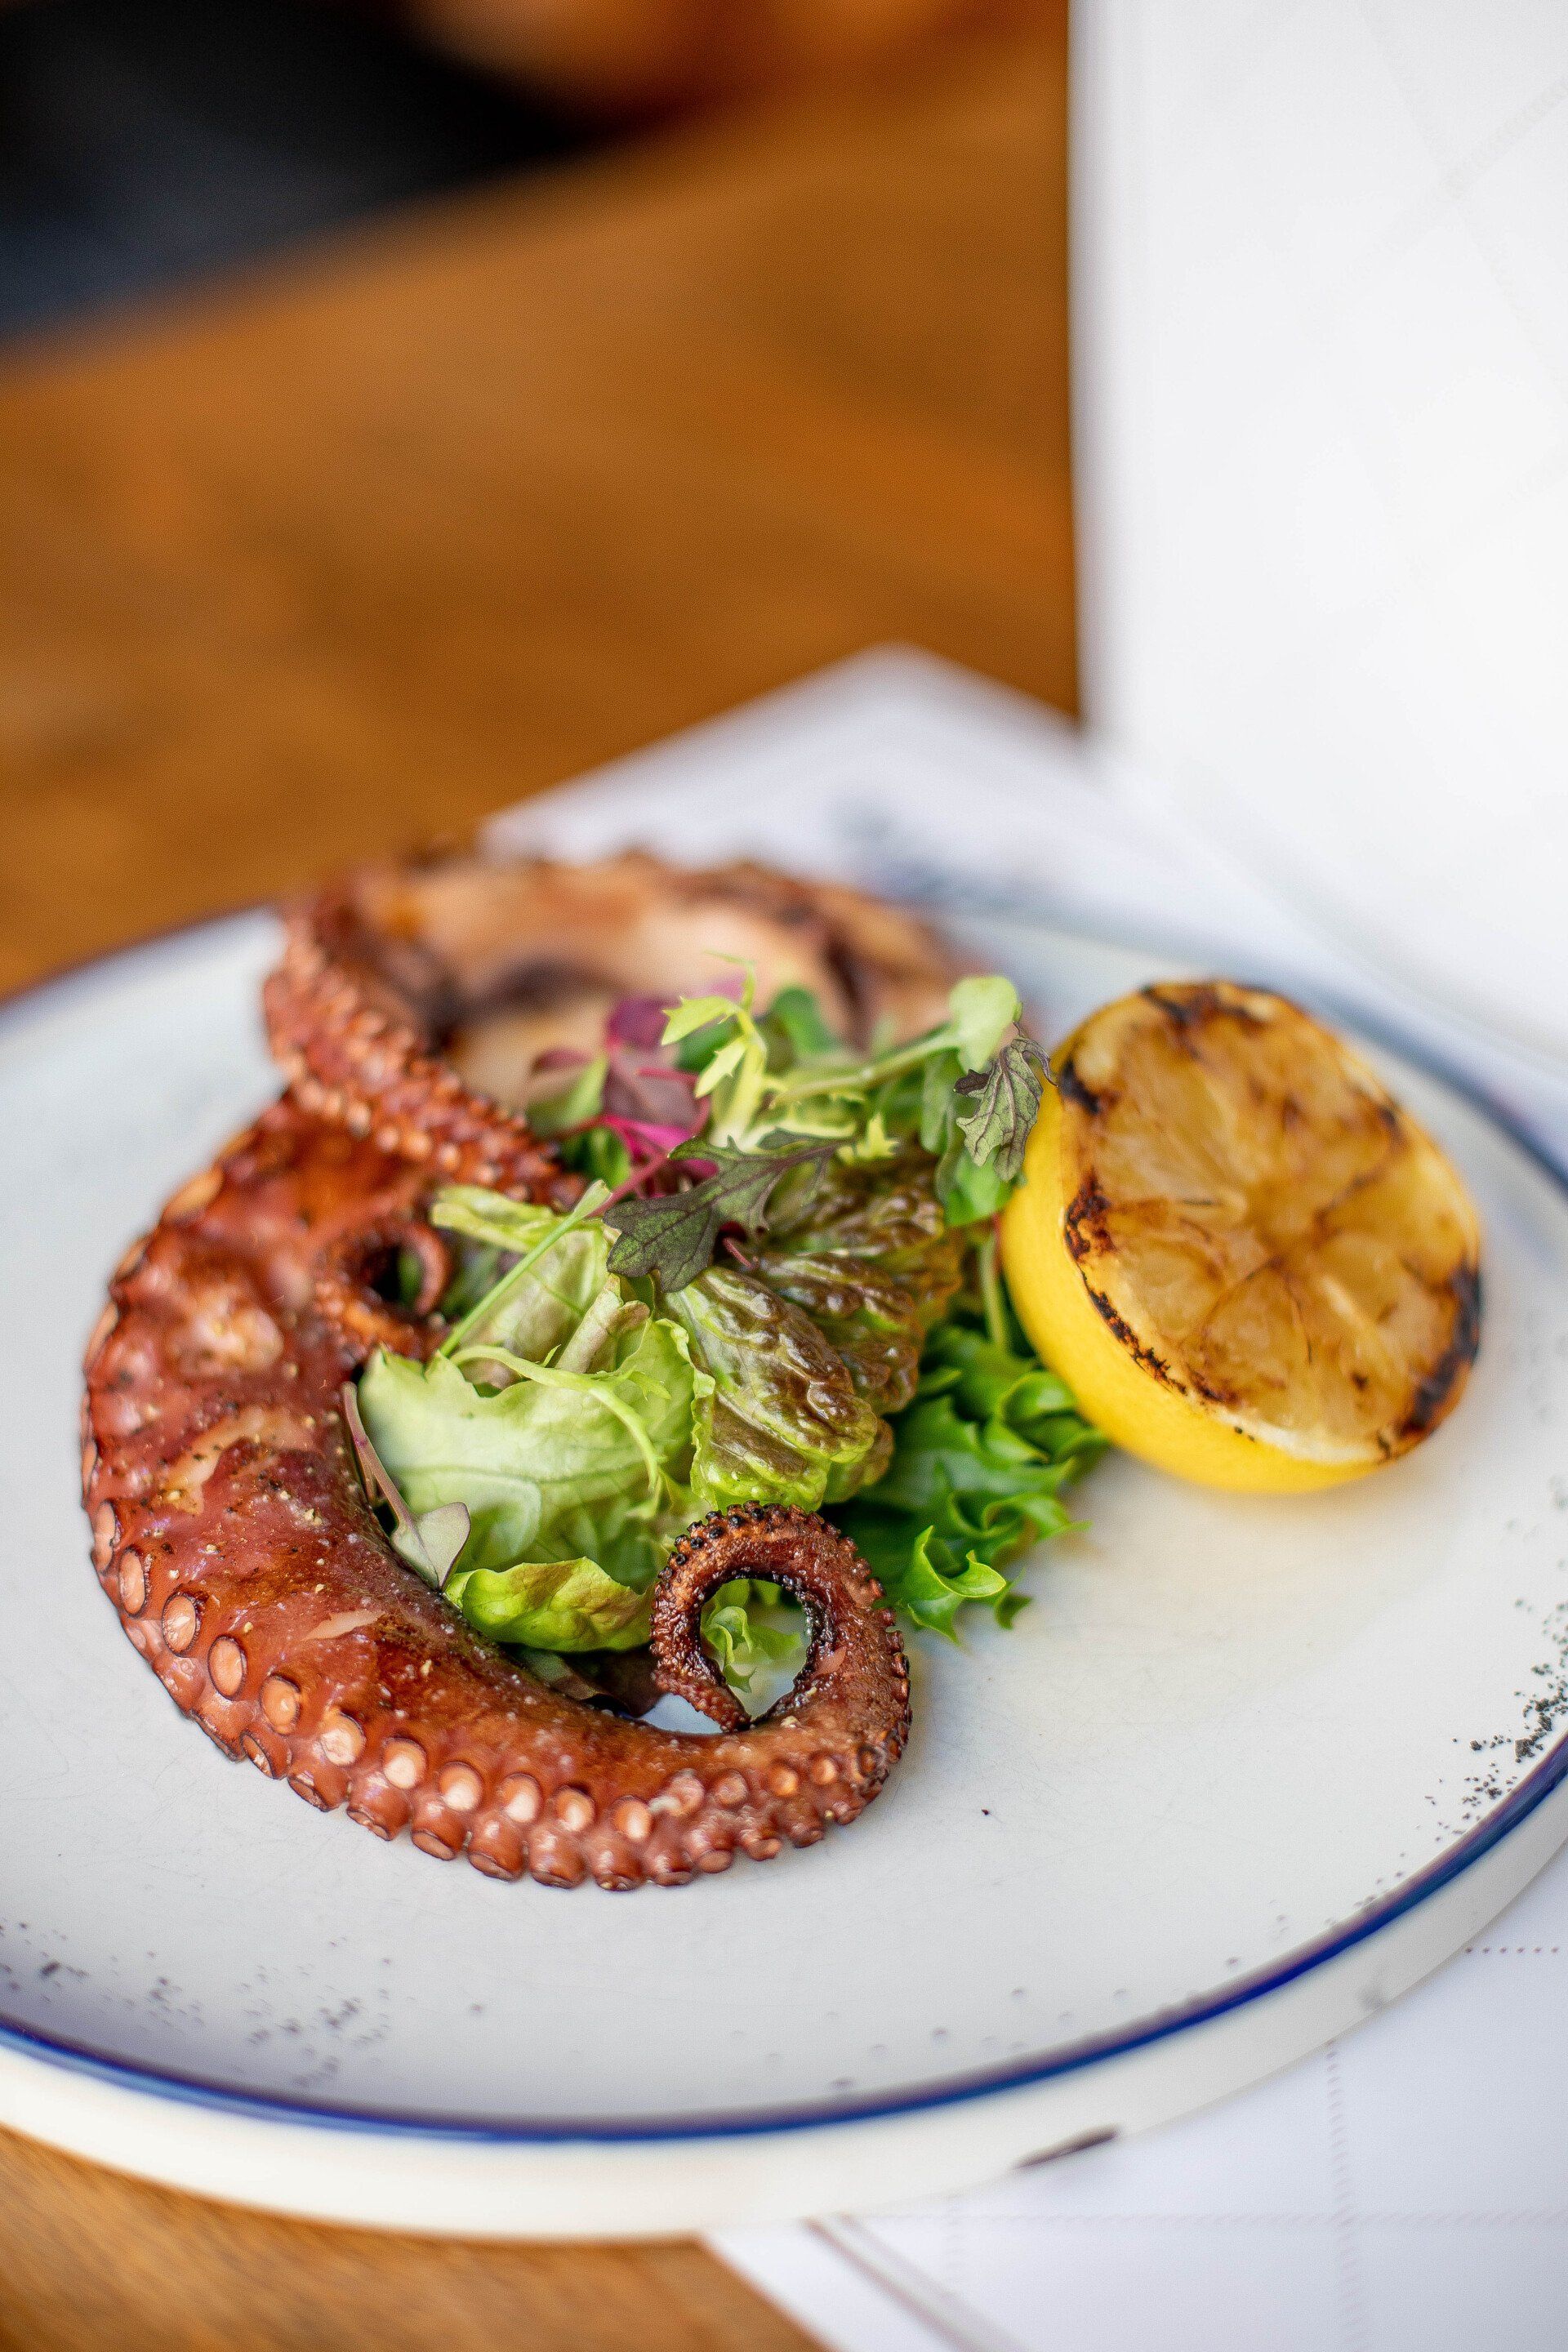 A close up of a plate of food with an octopus and a lemon on a table.